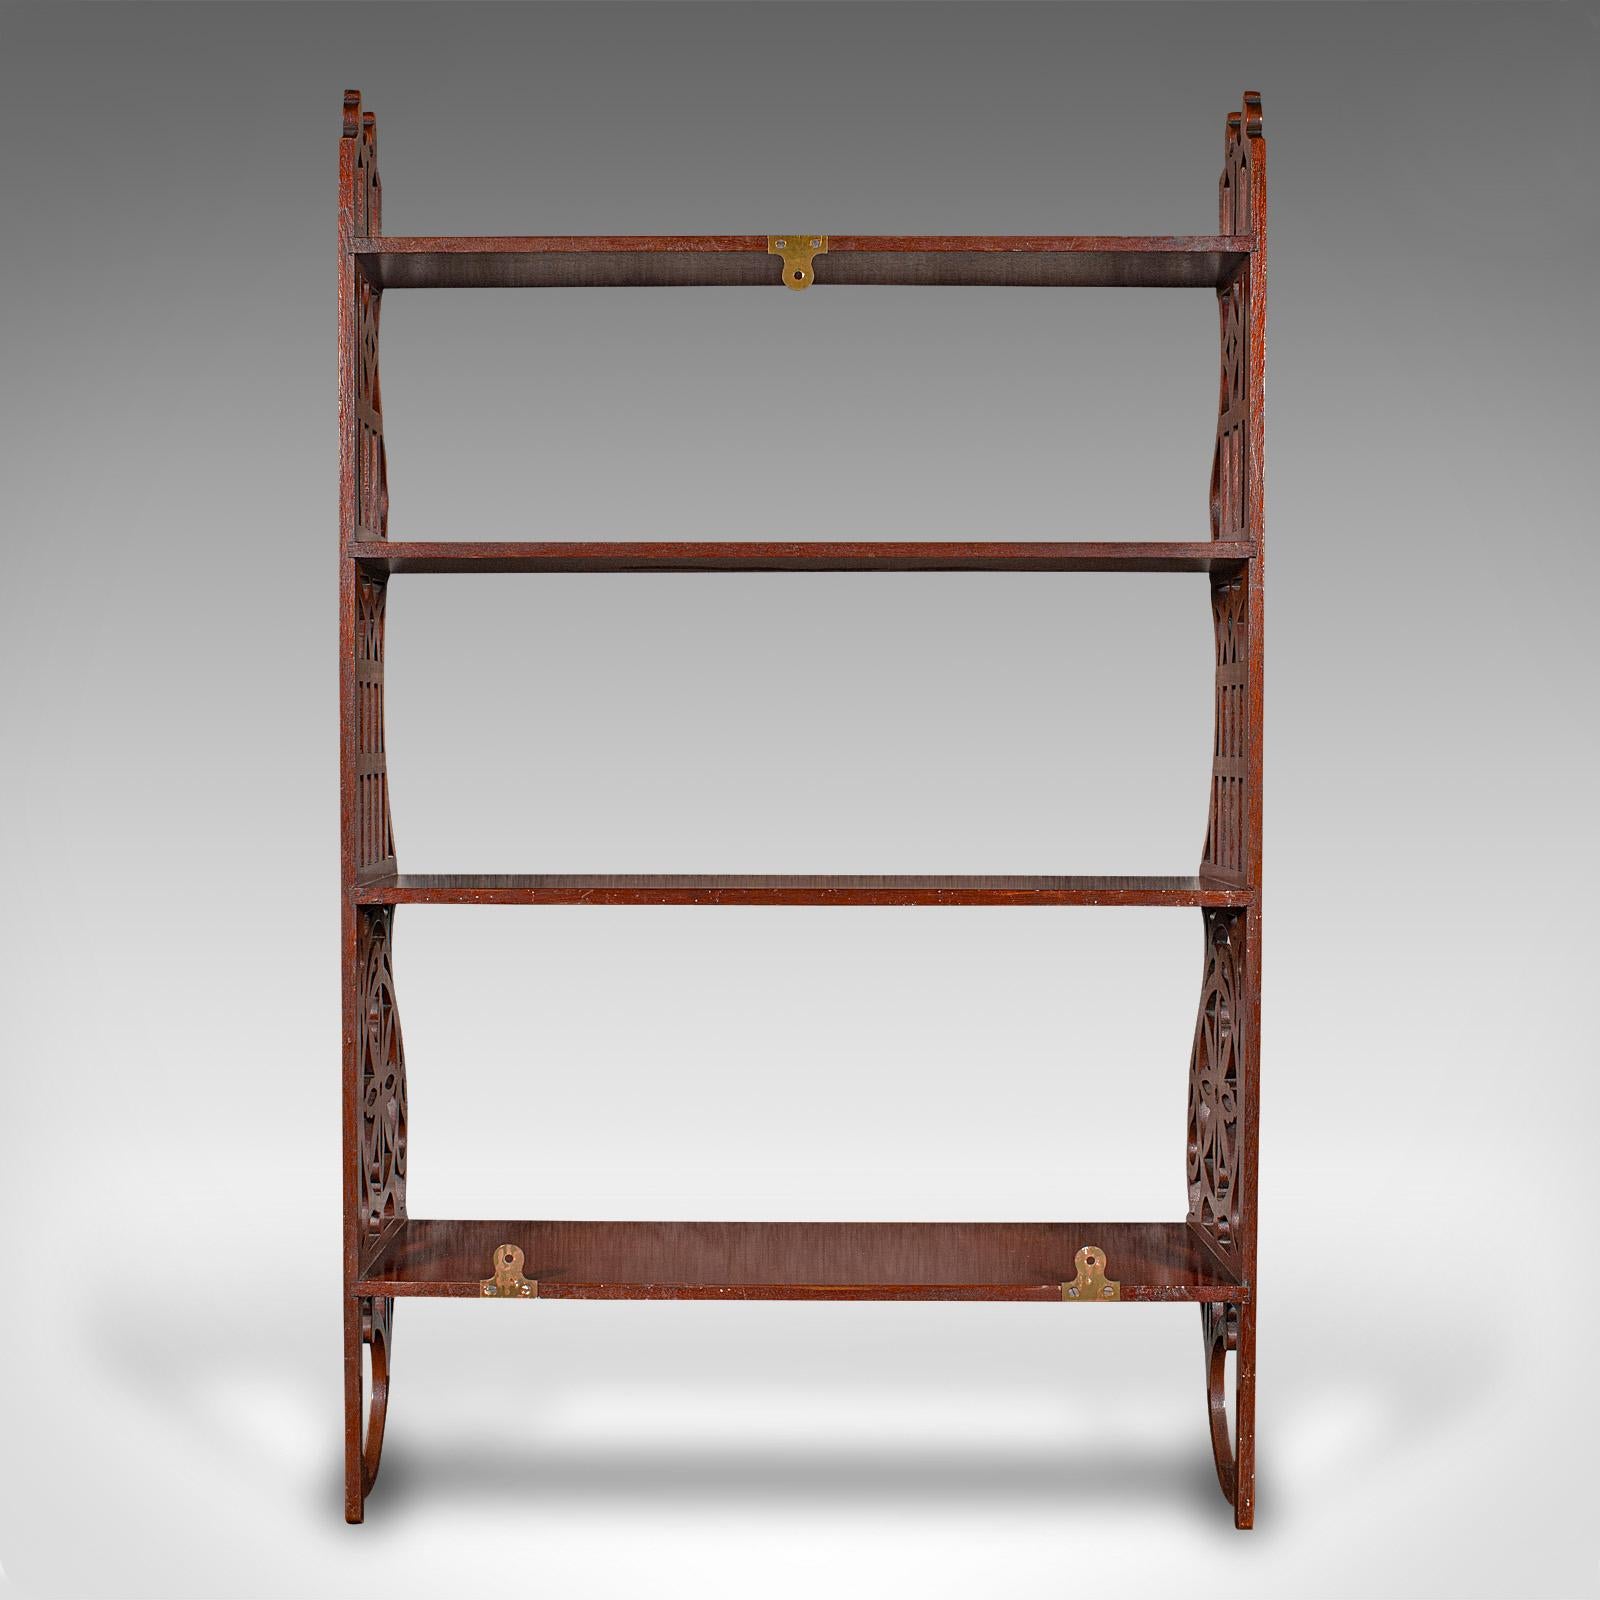 Antique 4-Tier Mounted Whatnot, English, Wall Display Shelves, Edwardian, C.1910 For Sale 2